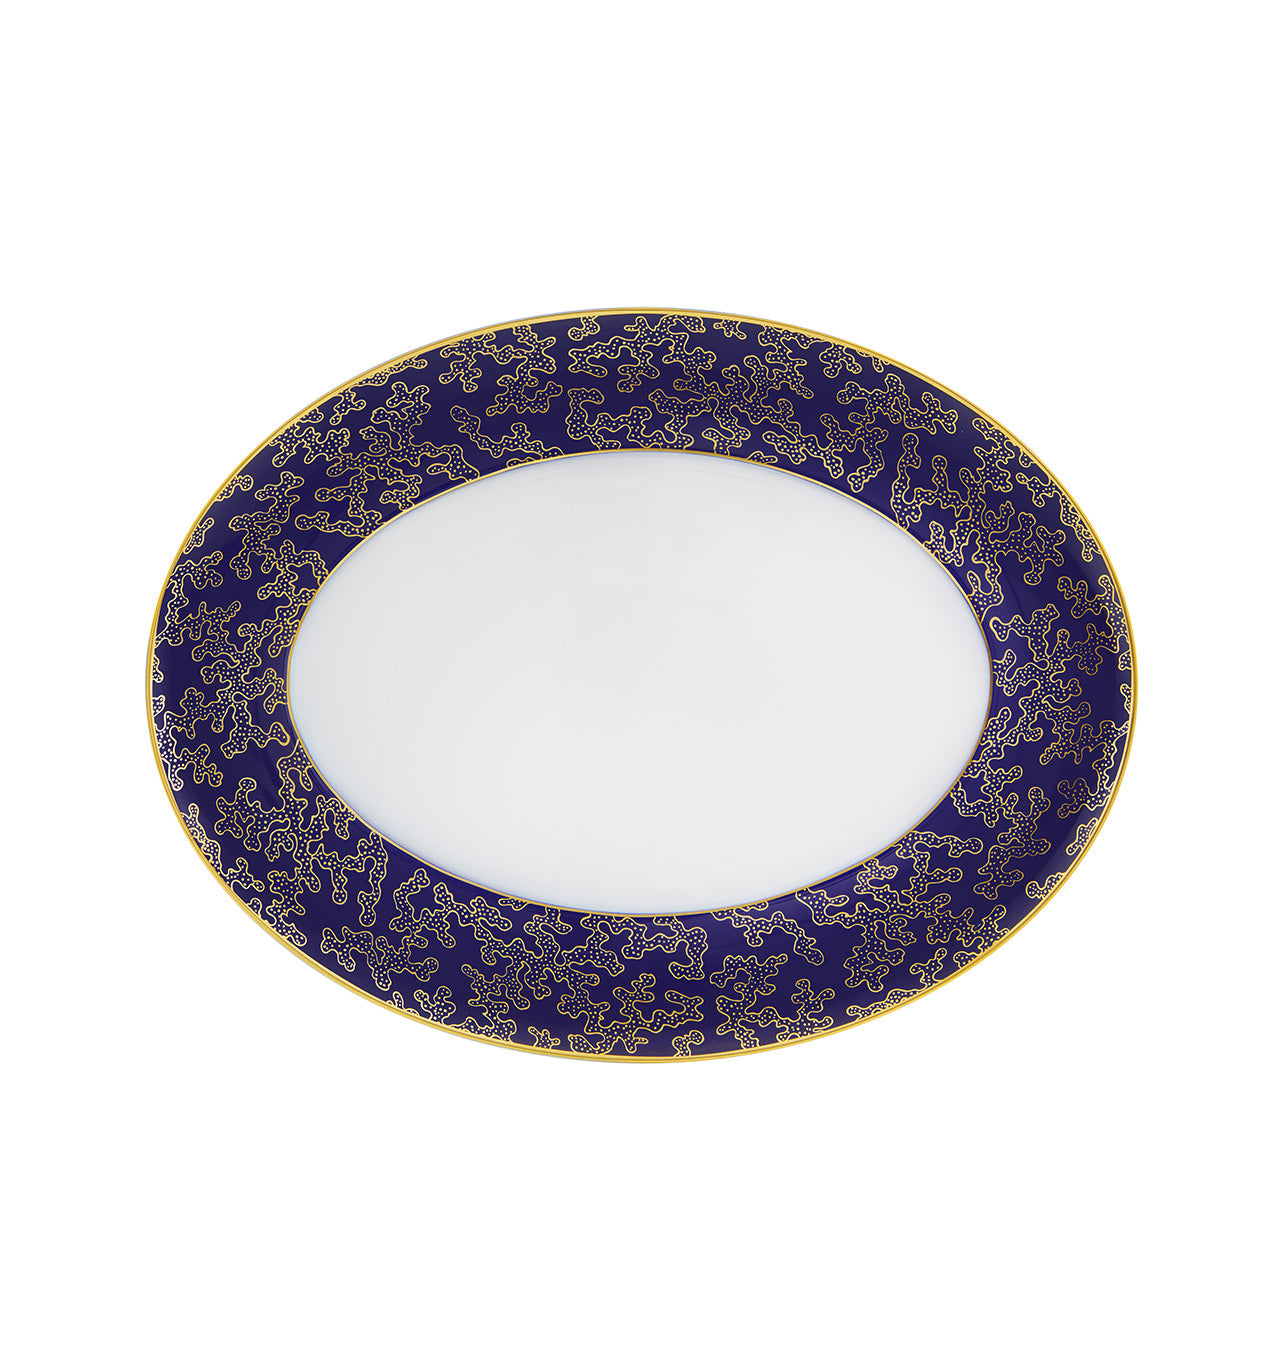 Cailloute - Small Oval Platter LAZADO